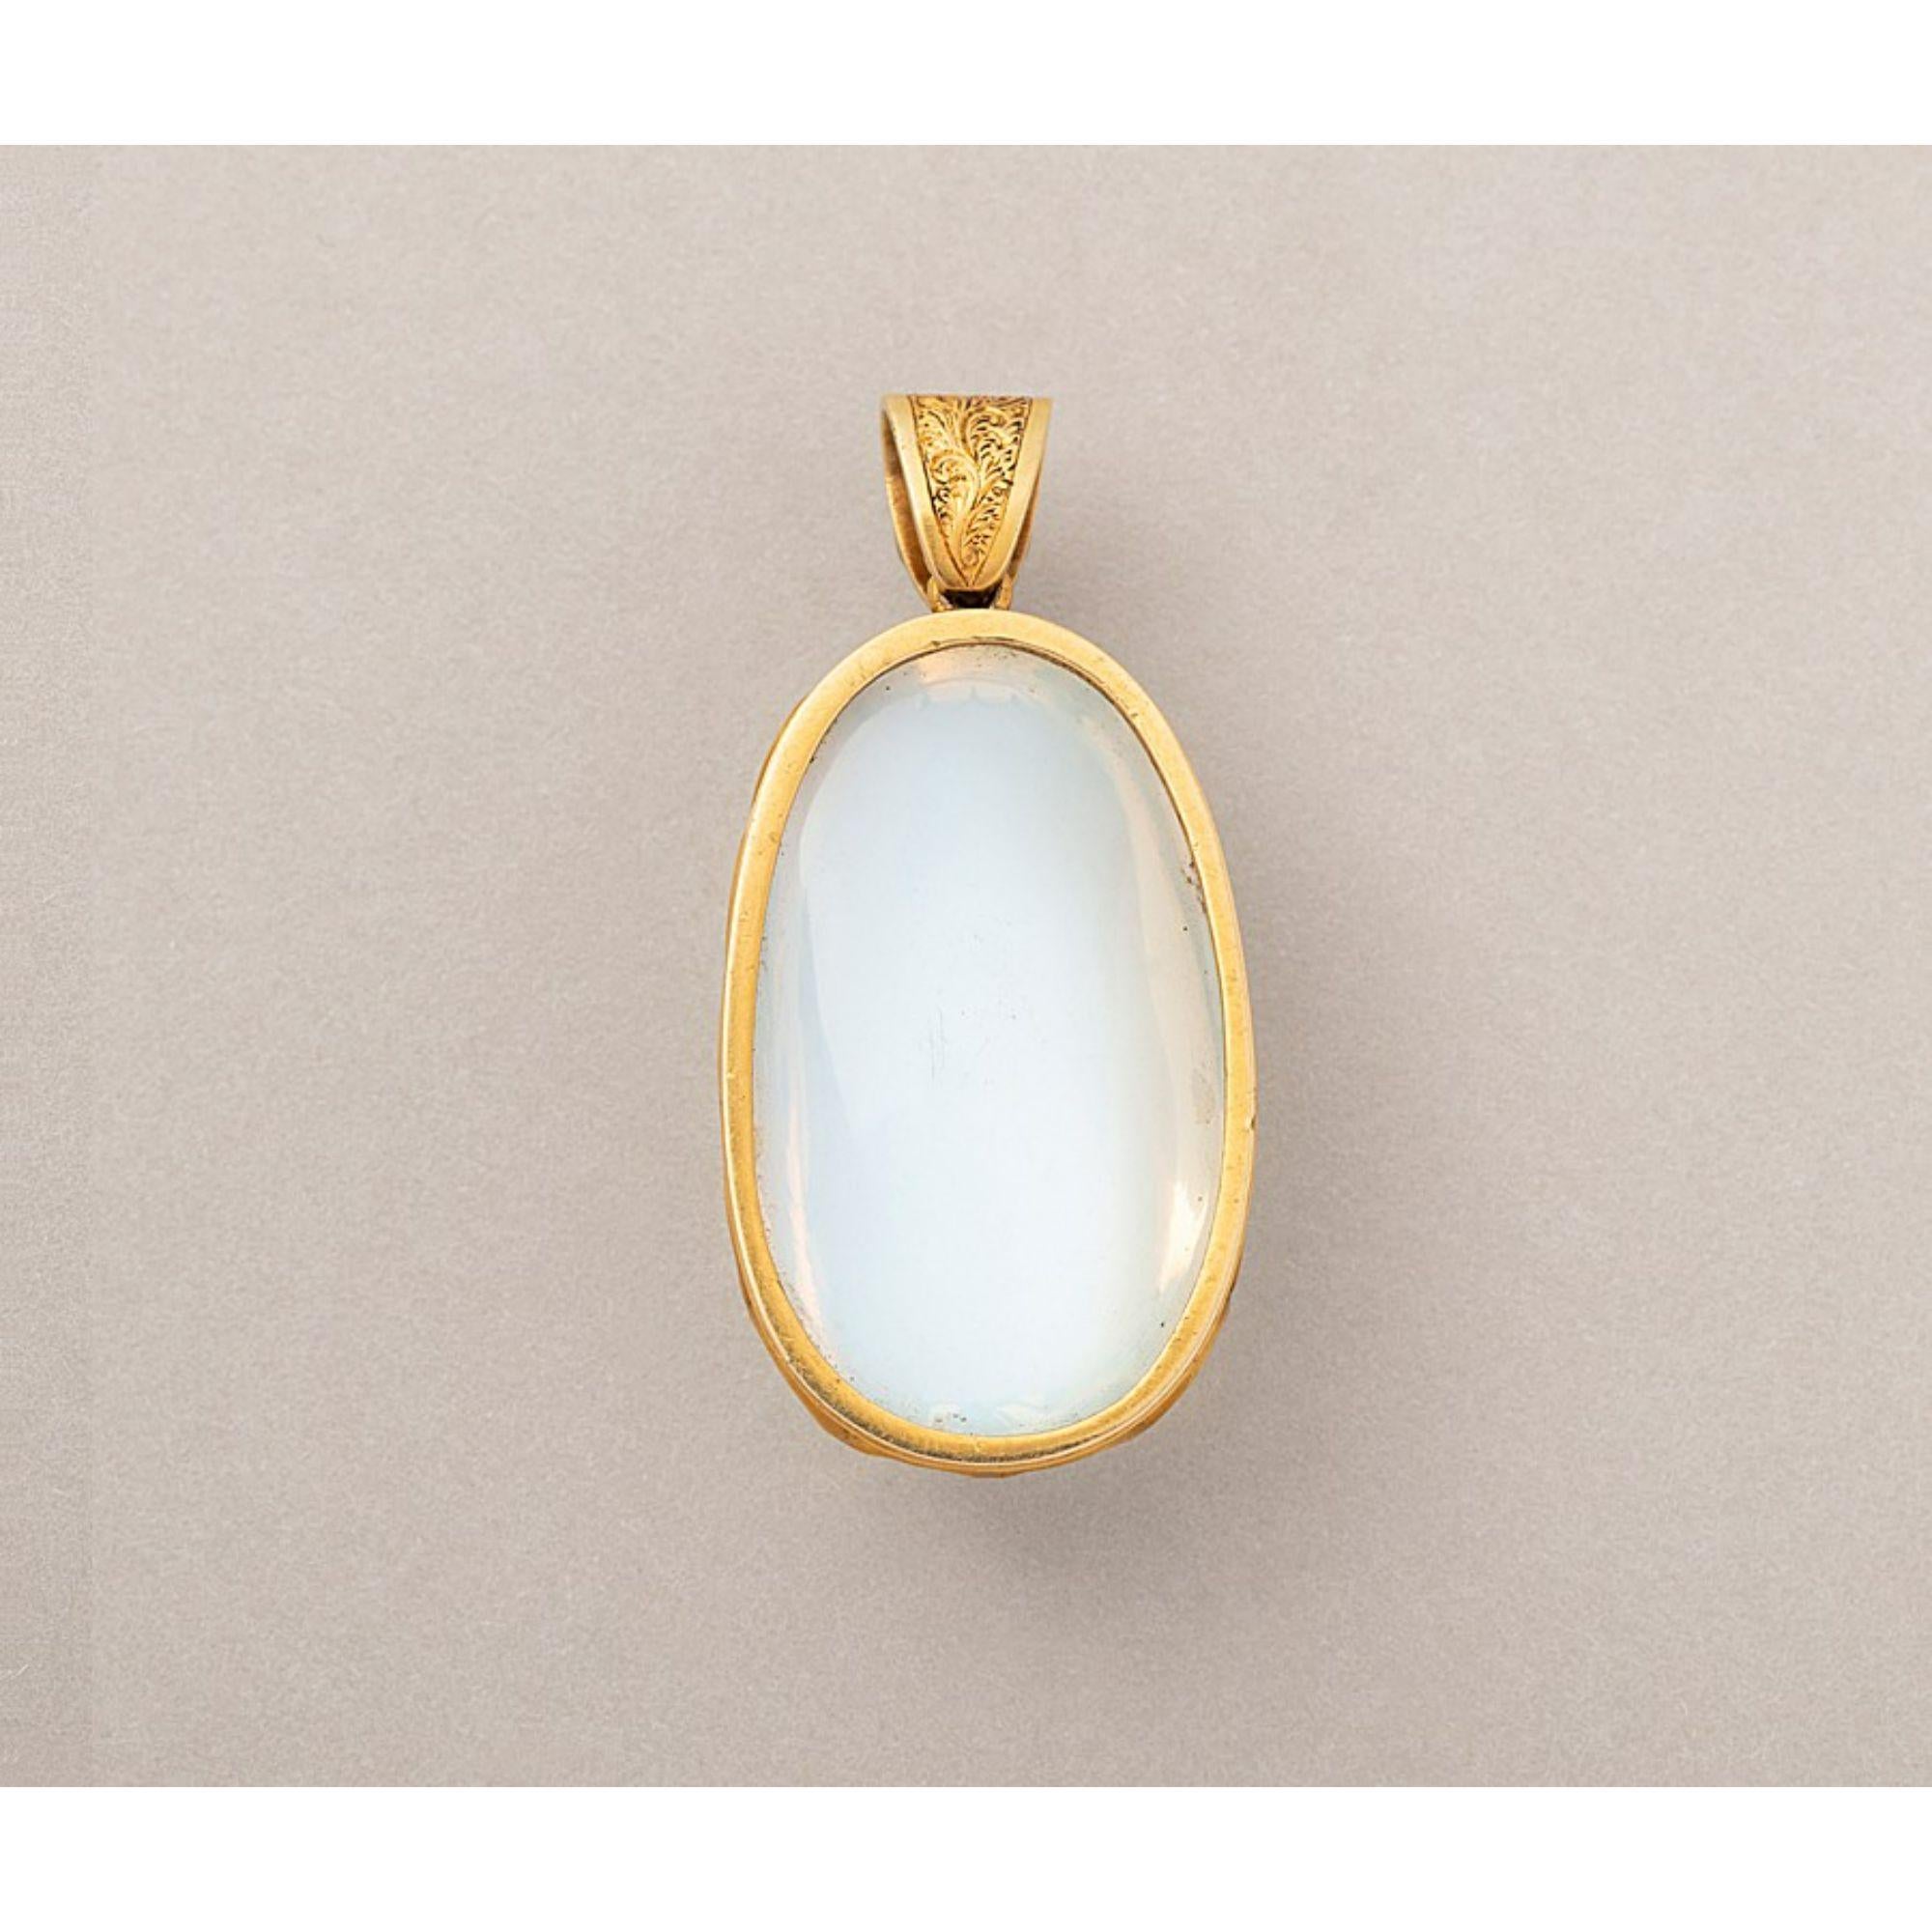 An 18 carat gold pendant set with a large, oval-pear, cabochon cut moonstone open set in fourteen elegant claws, most likely English in origin, circa 1890.

Additional information:
Period: Victorian
Weight: 16.13 grams
Dimensions: 40 x 19 mm